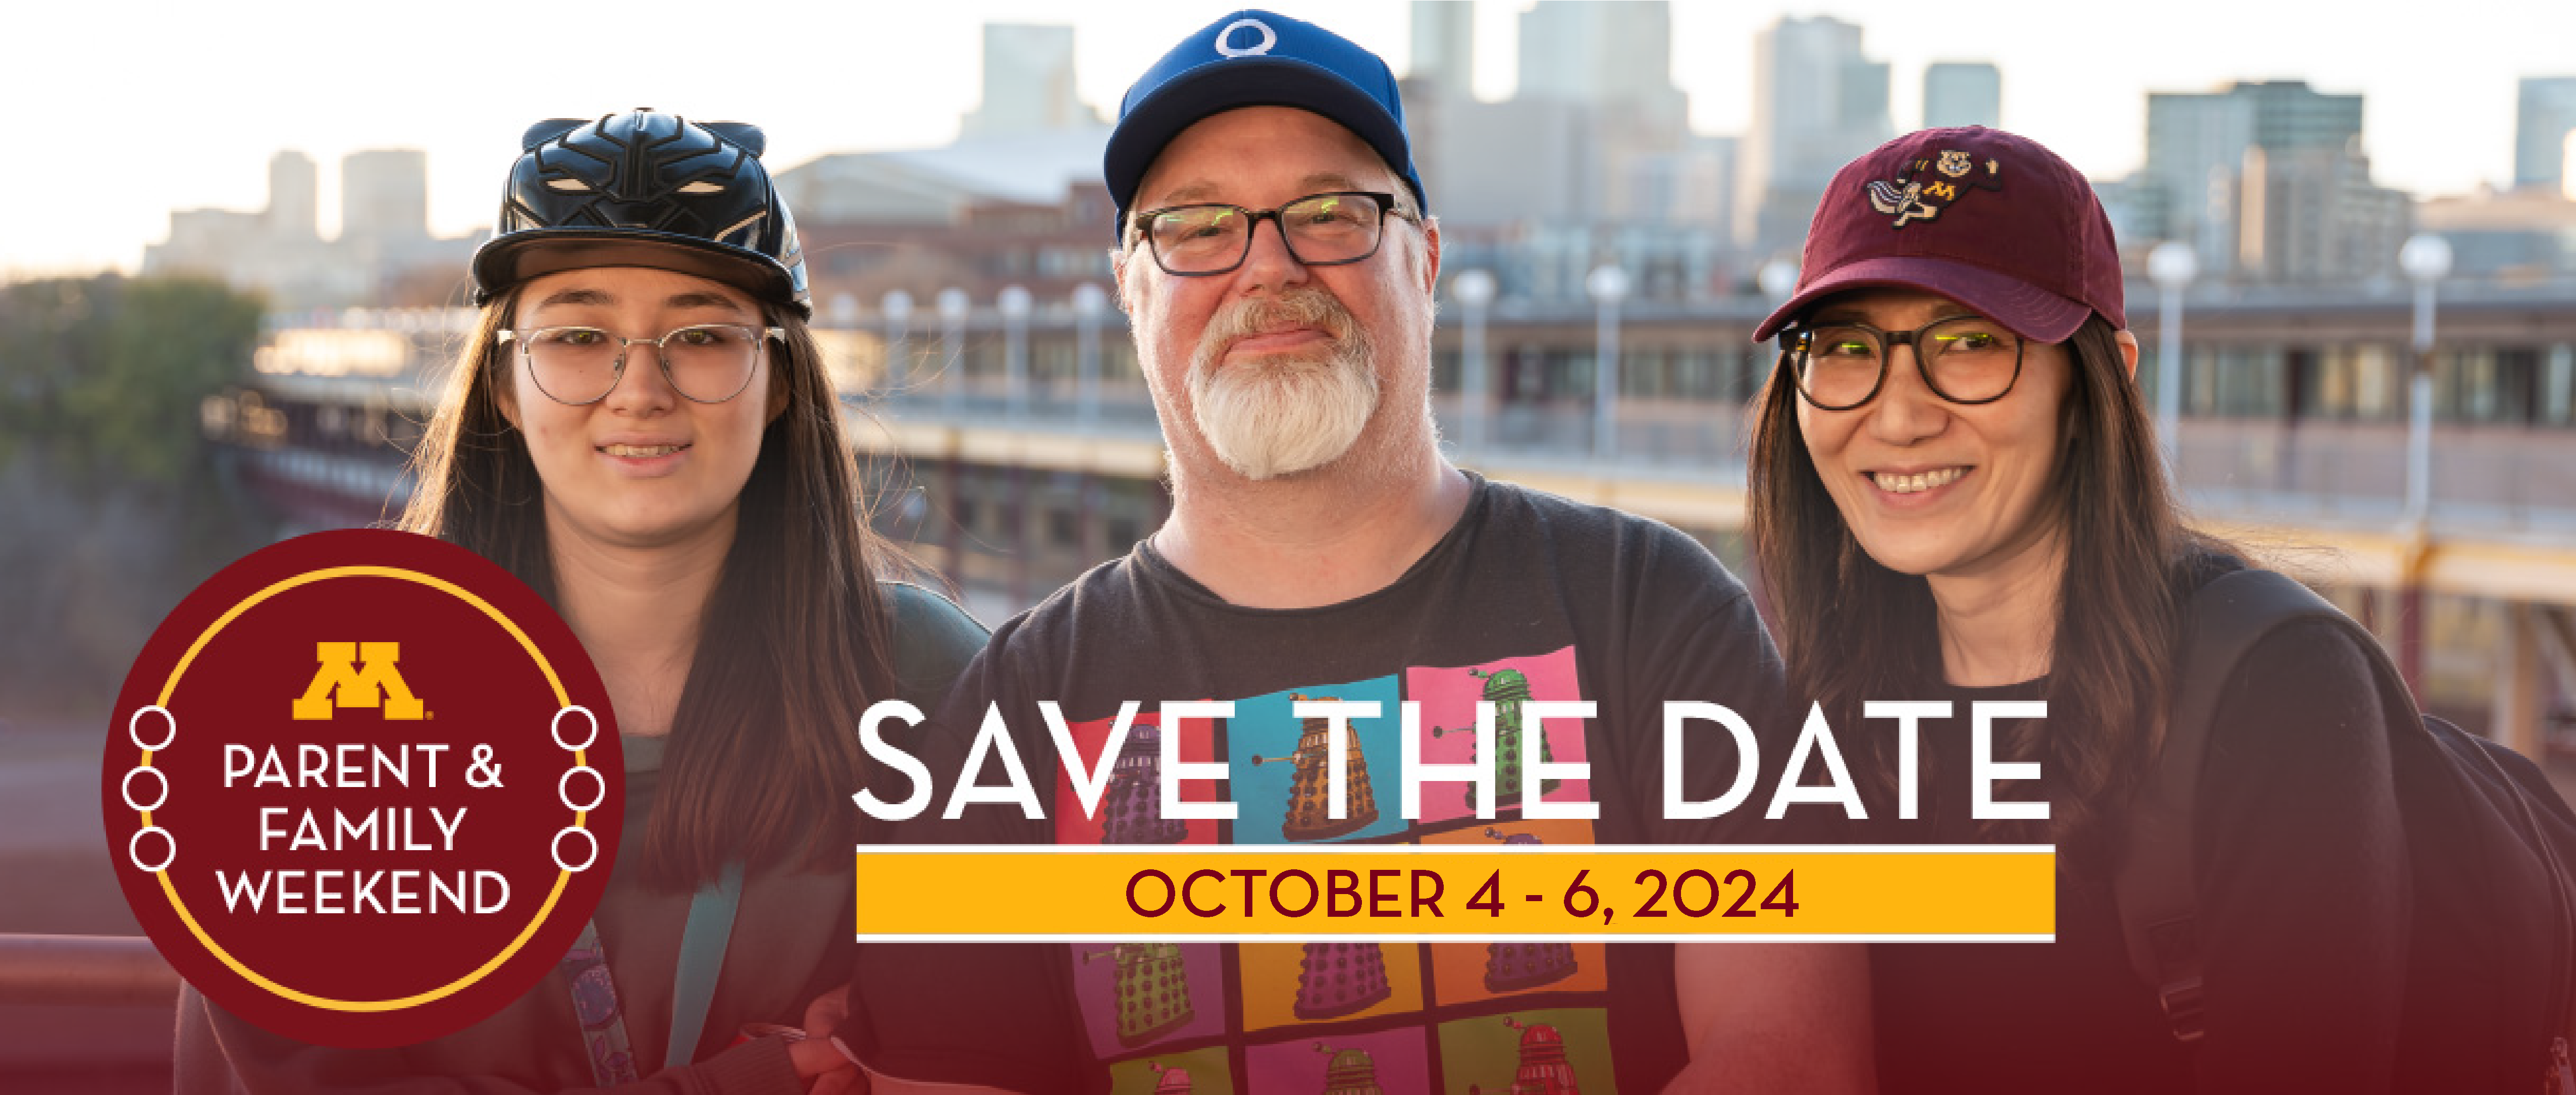 Save the date: Parent & Family Weekend will be October 4-6, 2024.